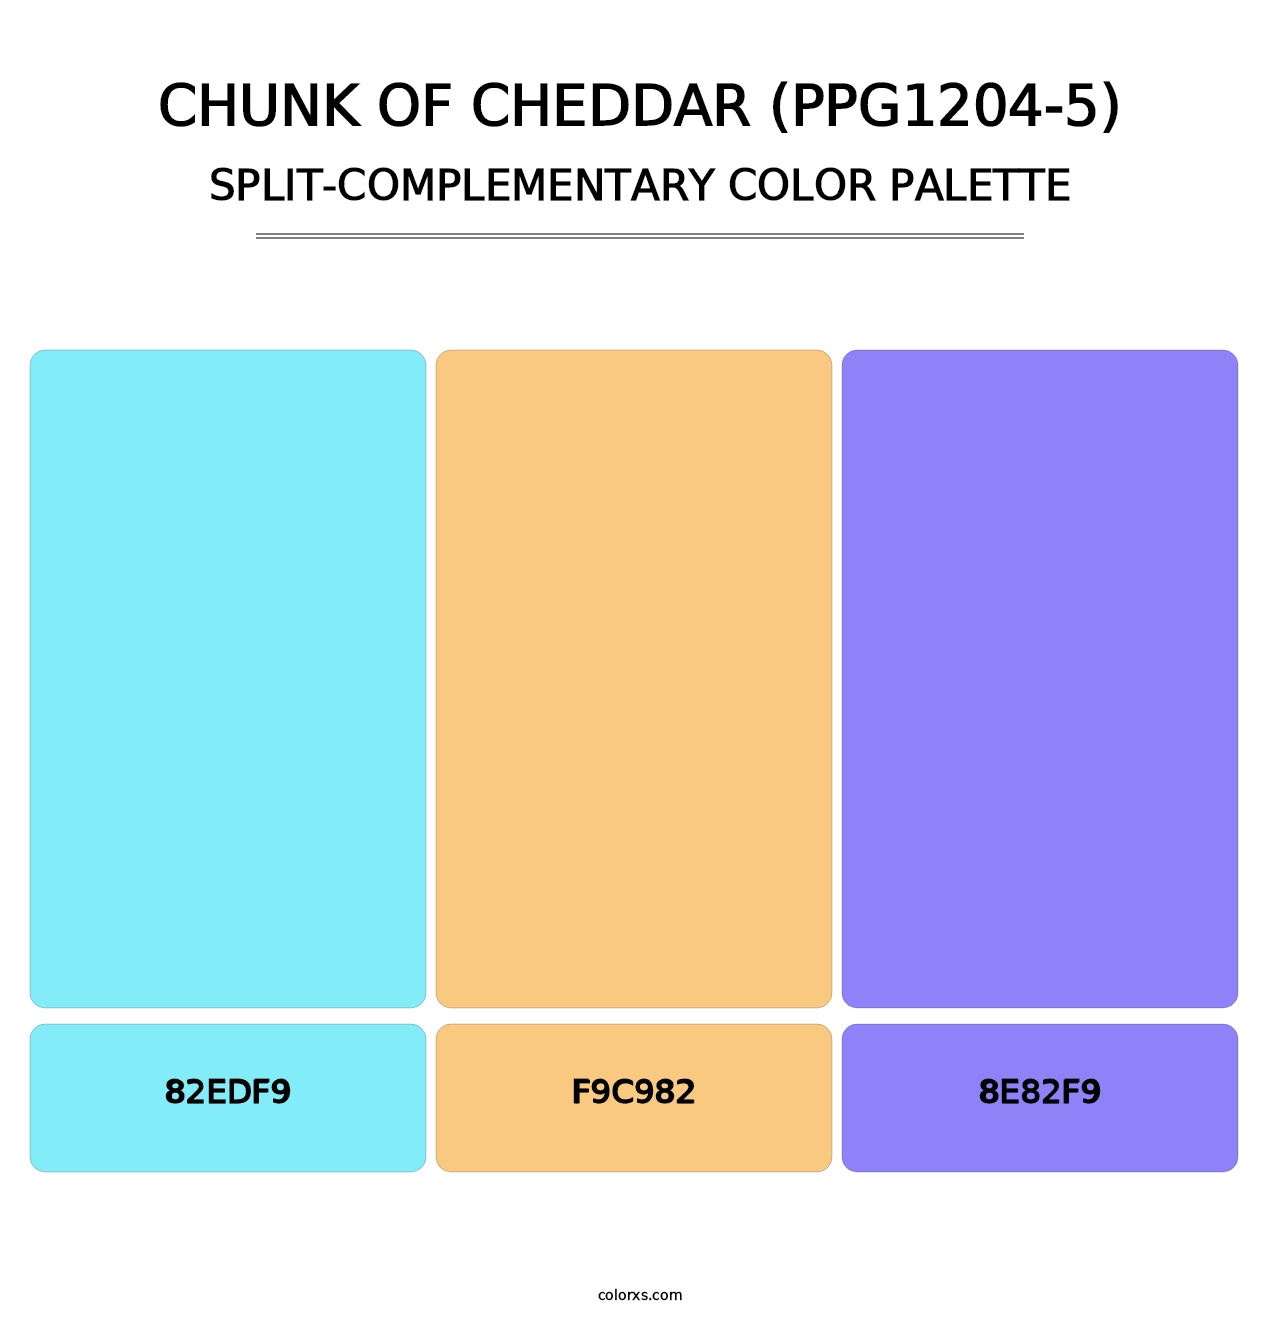 Chunk Of Cheddar (PPG1204-5) - Split-Complementary Color Palette